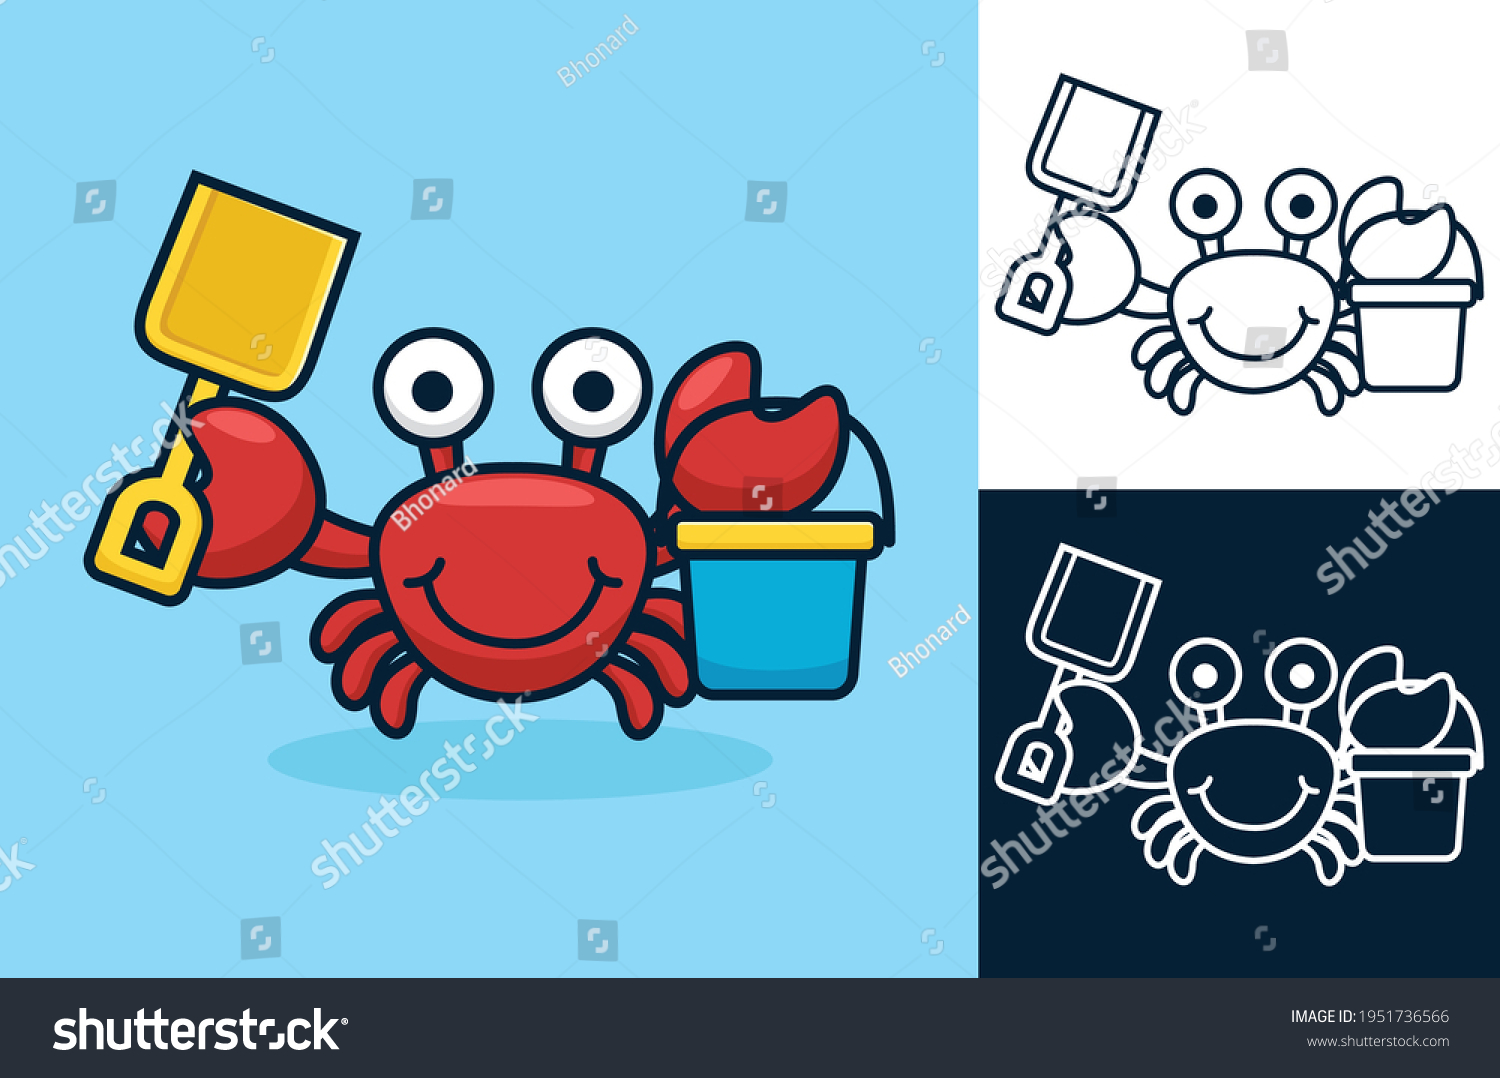 SVG of Funny red crab holding shovel and bucket. Vector cartoon illustration in flat icon style svg